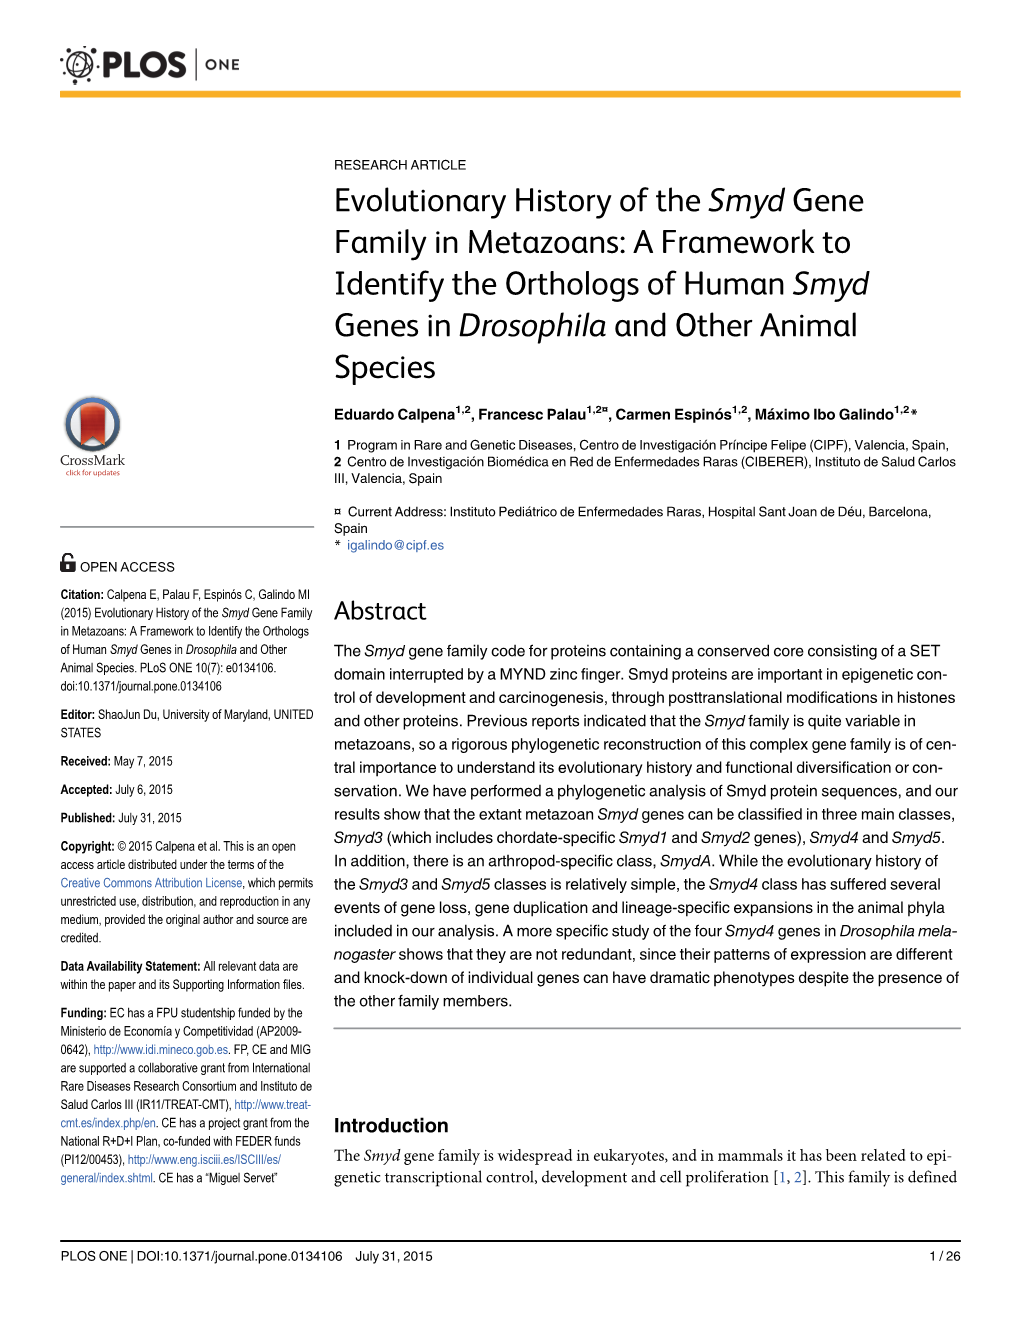 Evolutionary History of the Smyd Gene Family in Metazoans: a Framework to Identify the Orthologs of Human Smyd Genes in Drosophila and Other Animal Species